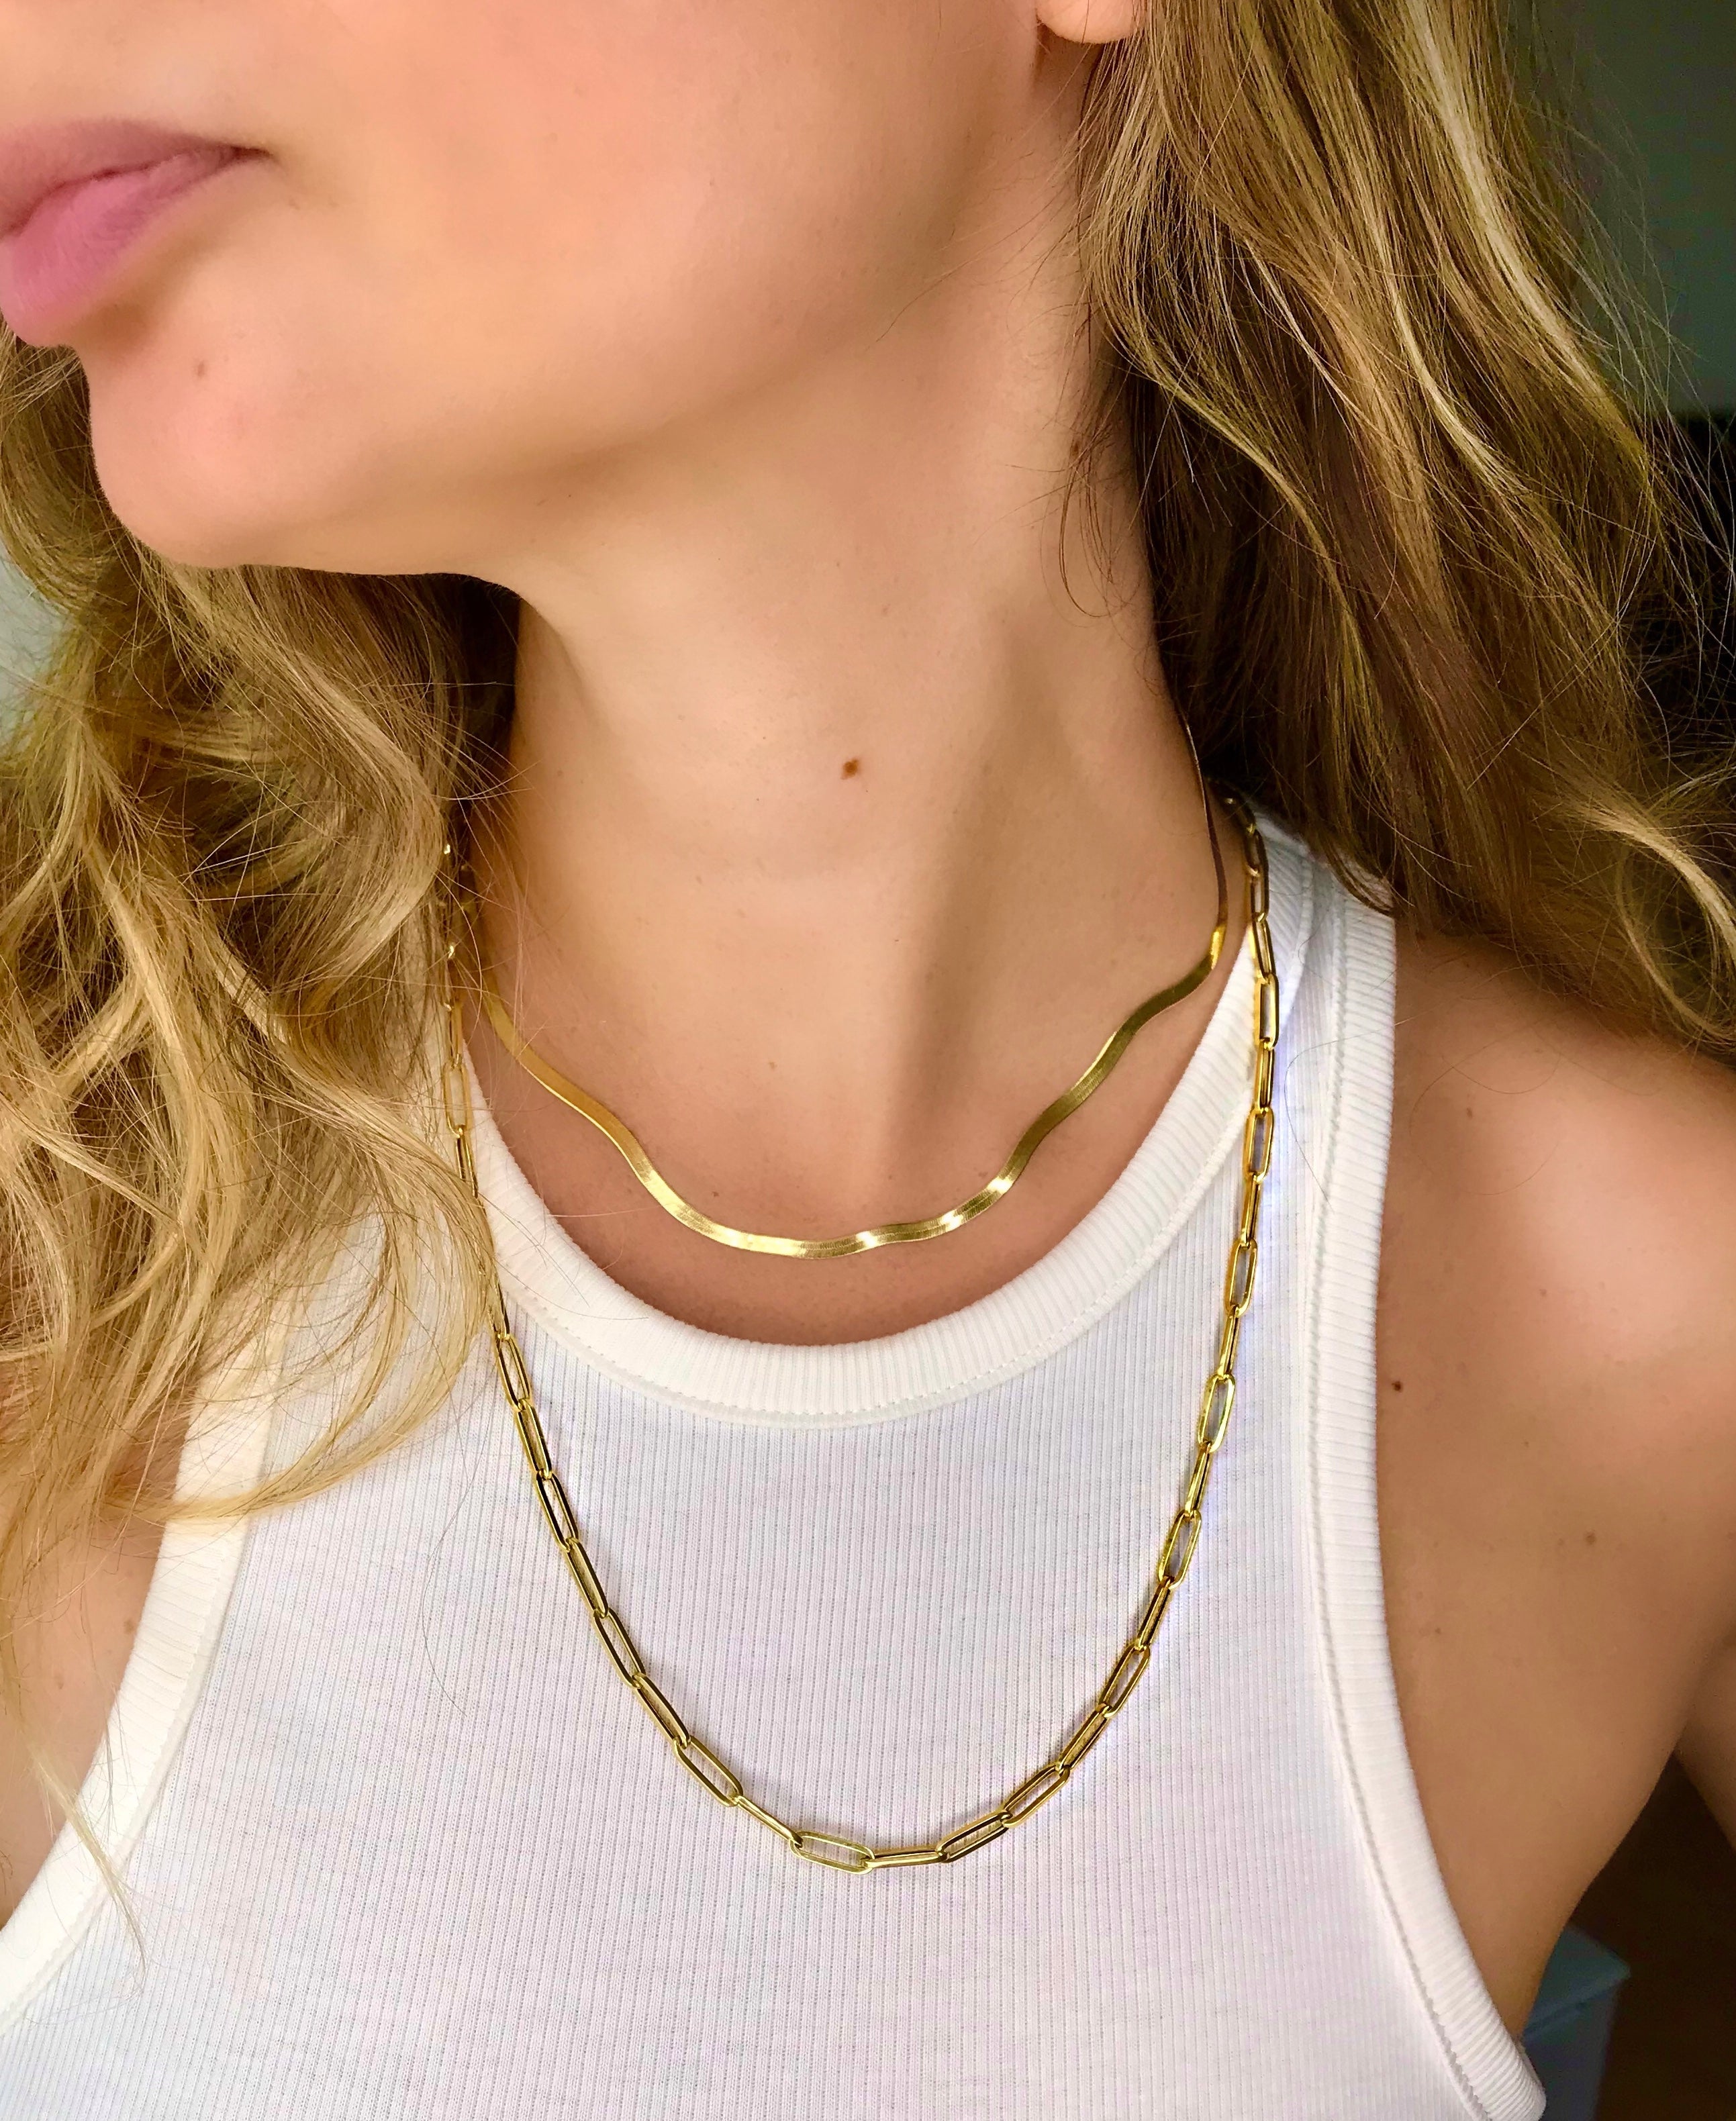 SAND Jewelry Bold Gold Herringbone Chain Necklace – S.A.N.D. Jewelry